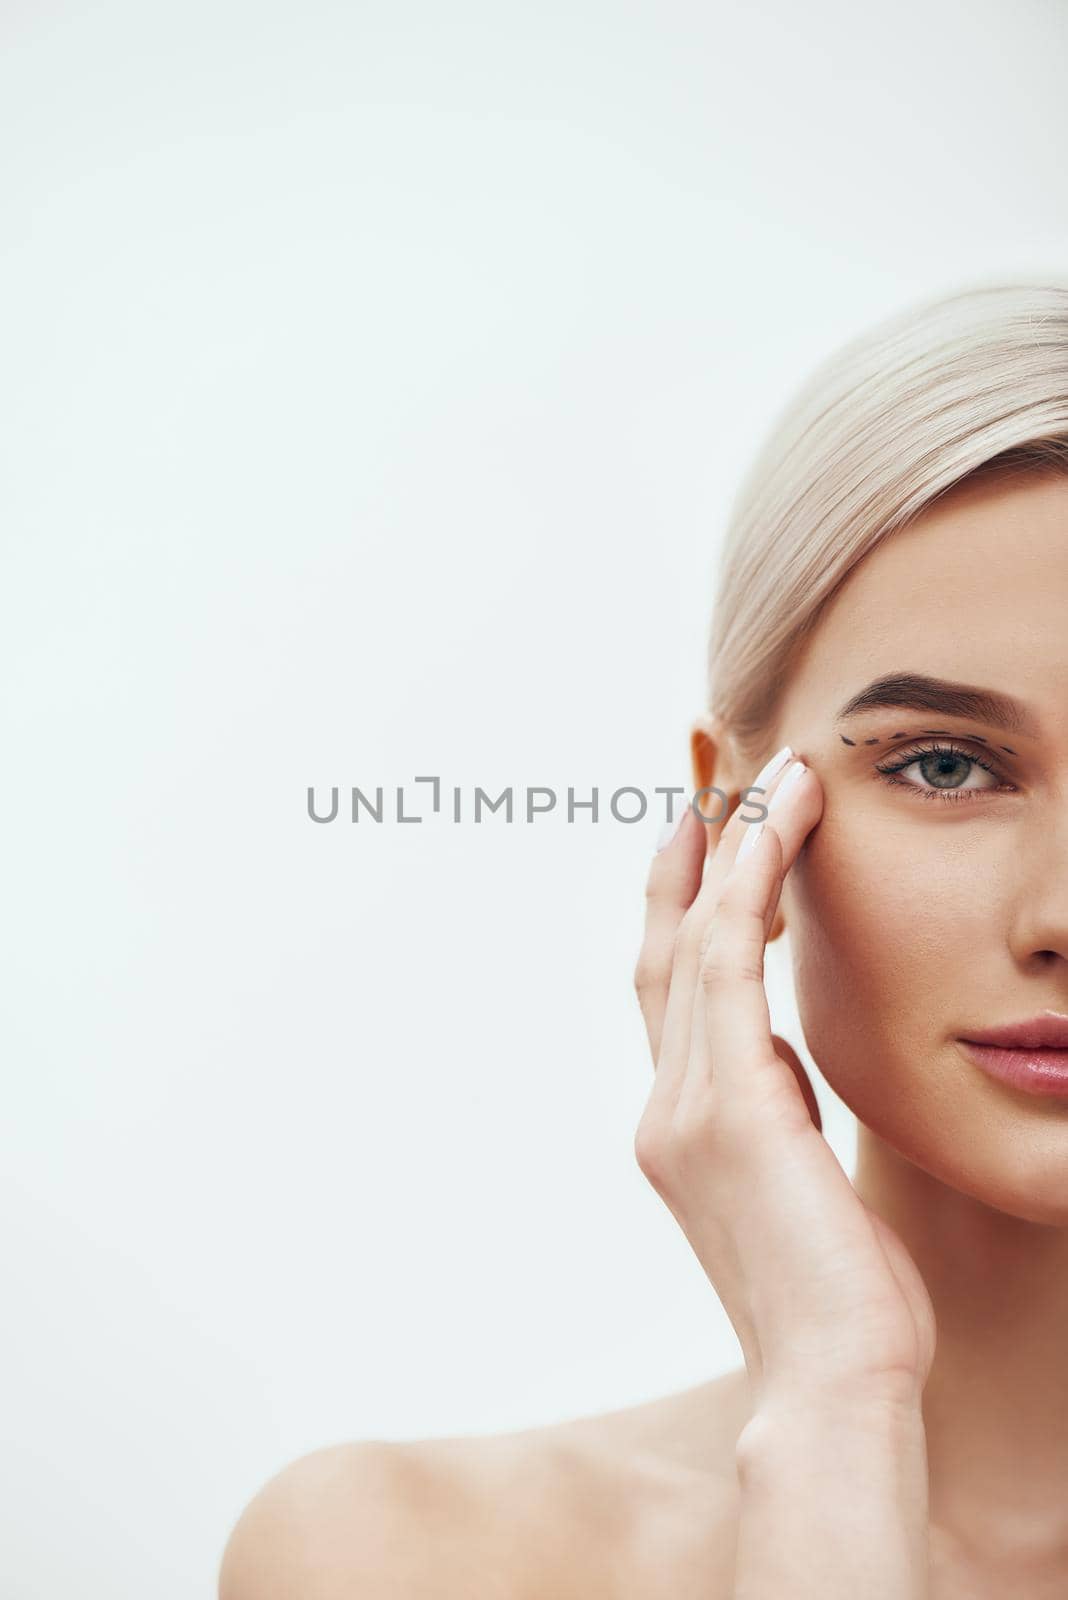 Plastic Surgery Operation. Cropped photo of pretty and young blonde woman touching her face with black surgical lines on eyelids and looking at camera by friendsstock